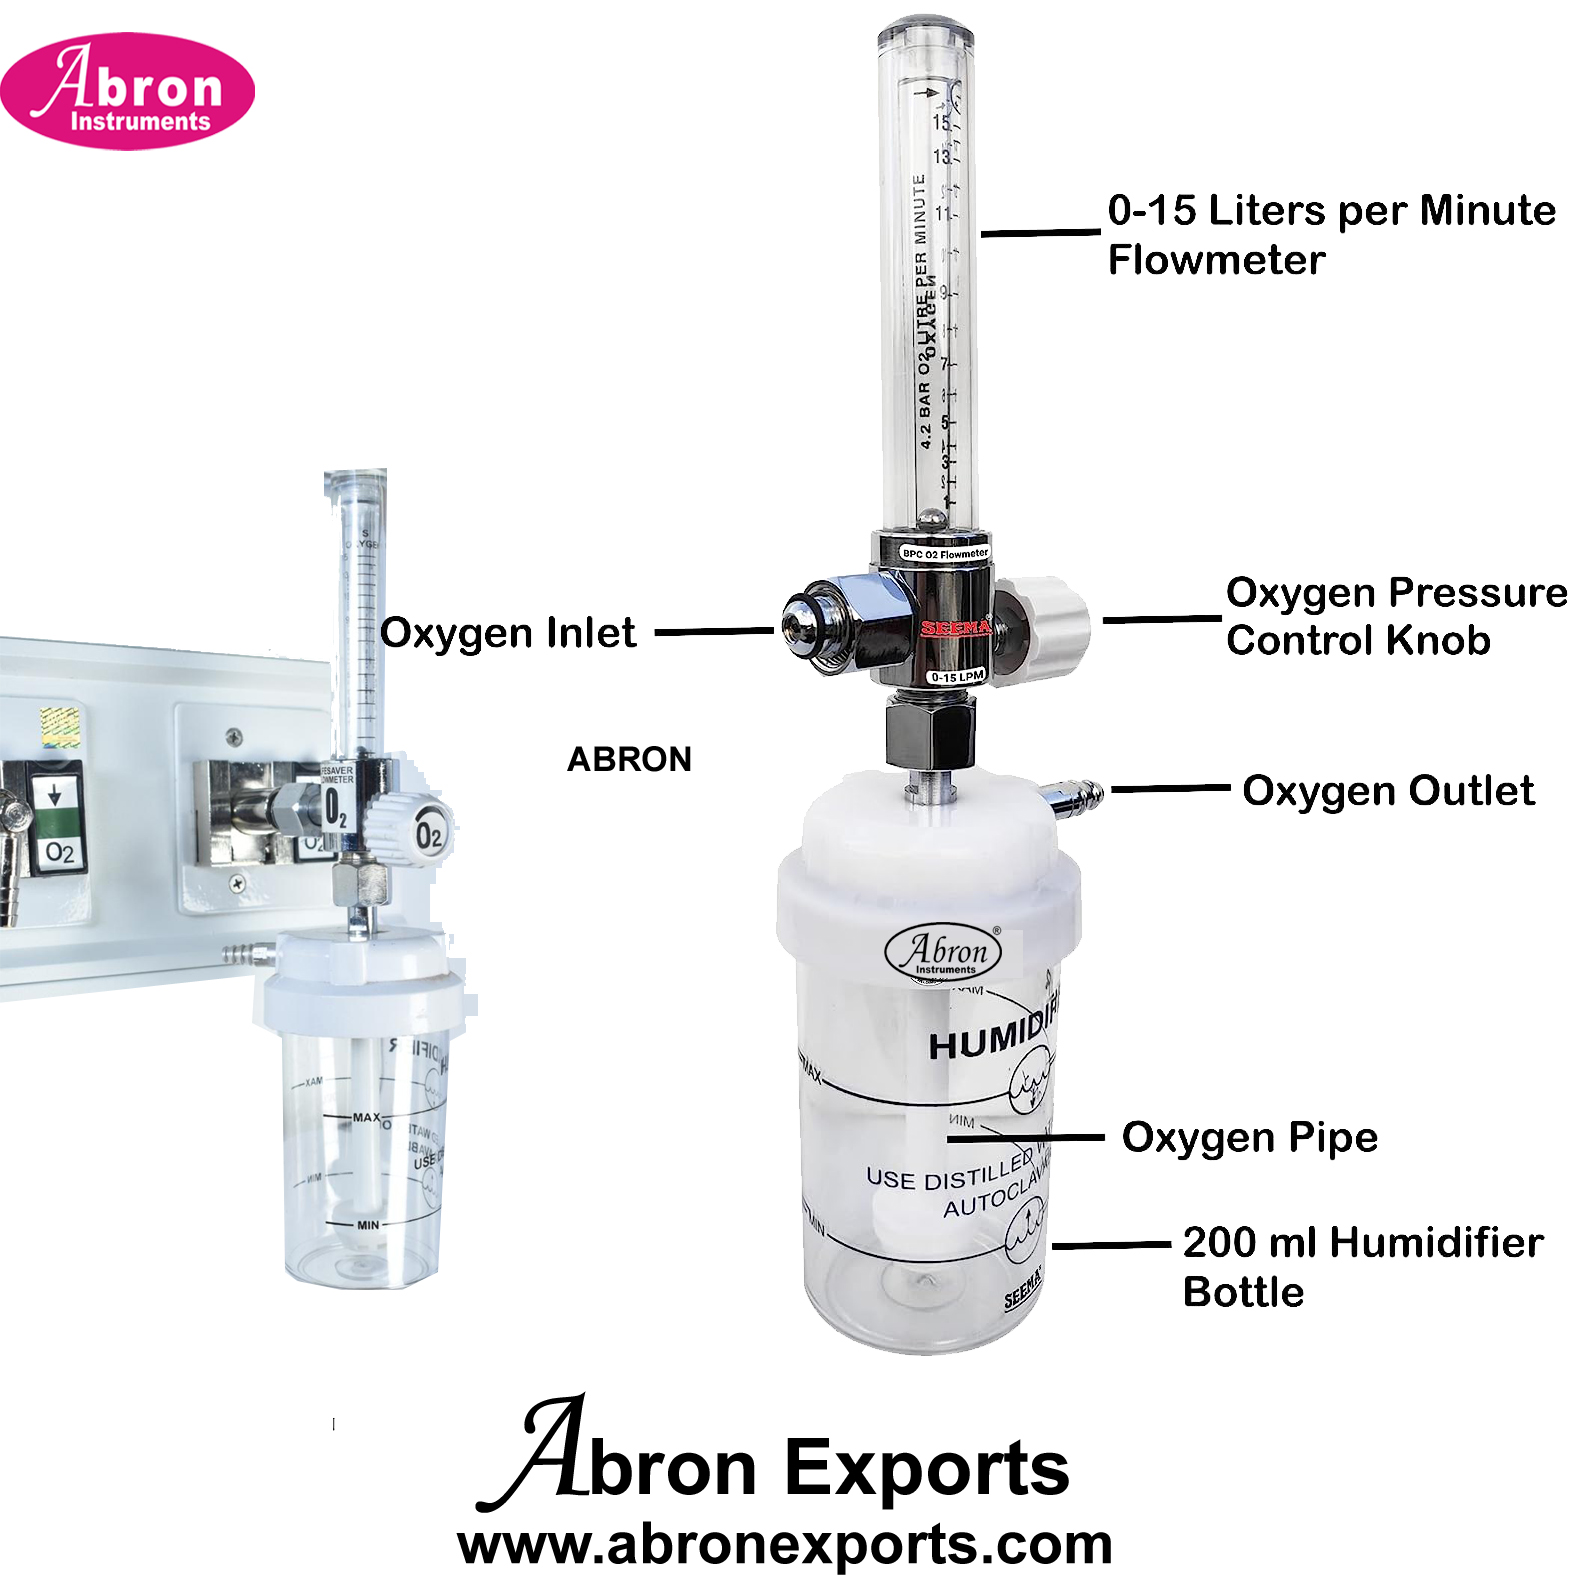 Medical Oxygen gas Flowmeter And Humidifier For Hospital Clinic Home Use for cylinder Abron ABM-1123HU 